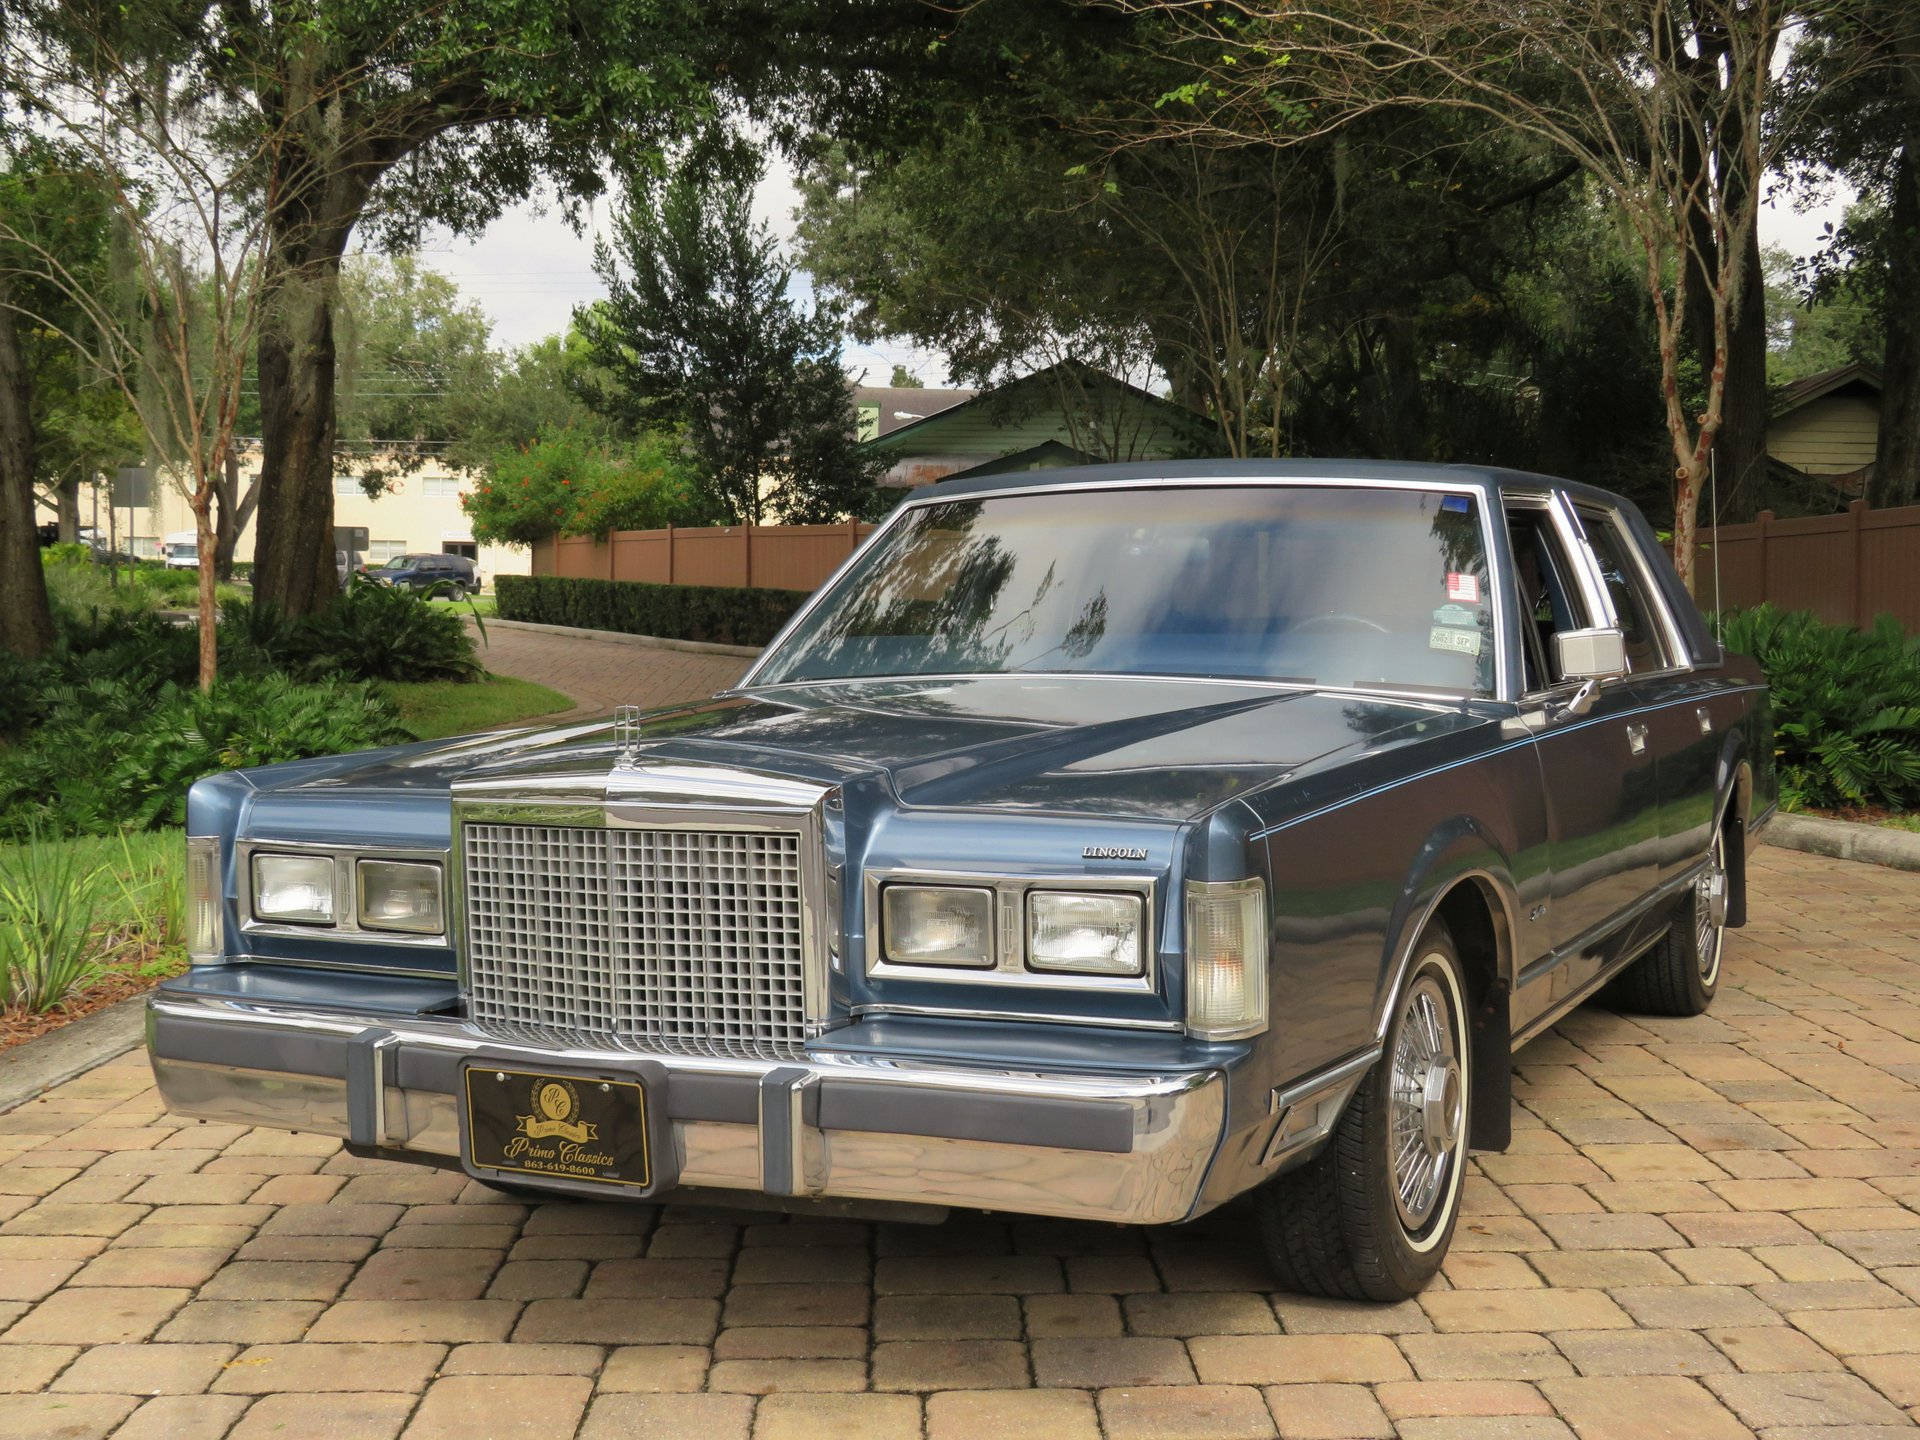 1986 Town Lincoln Car On A Paved Driveway Wallpaper